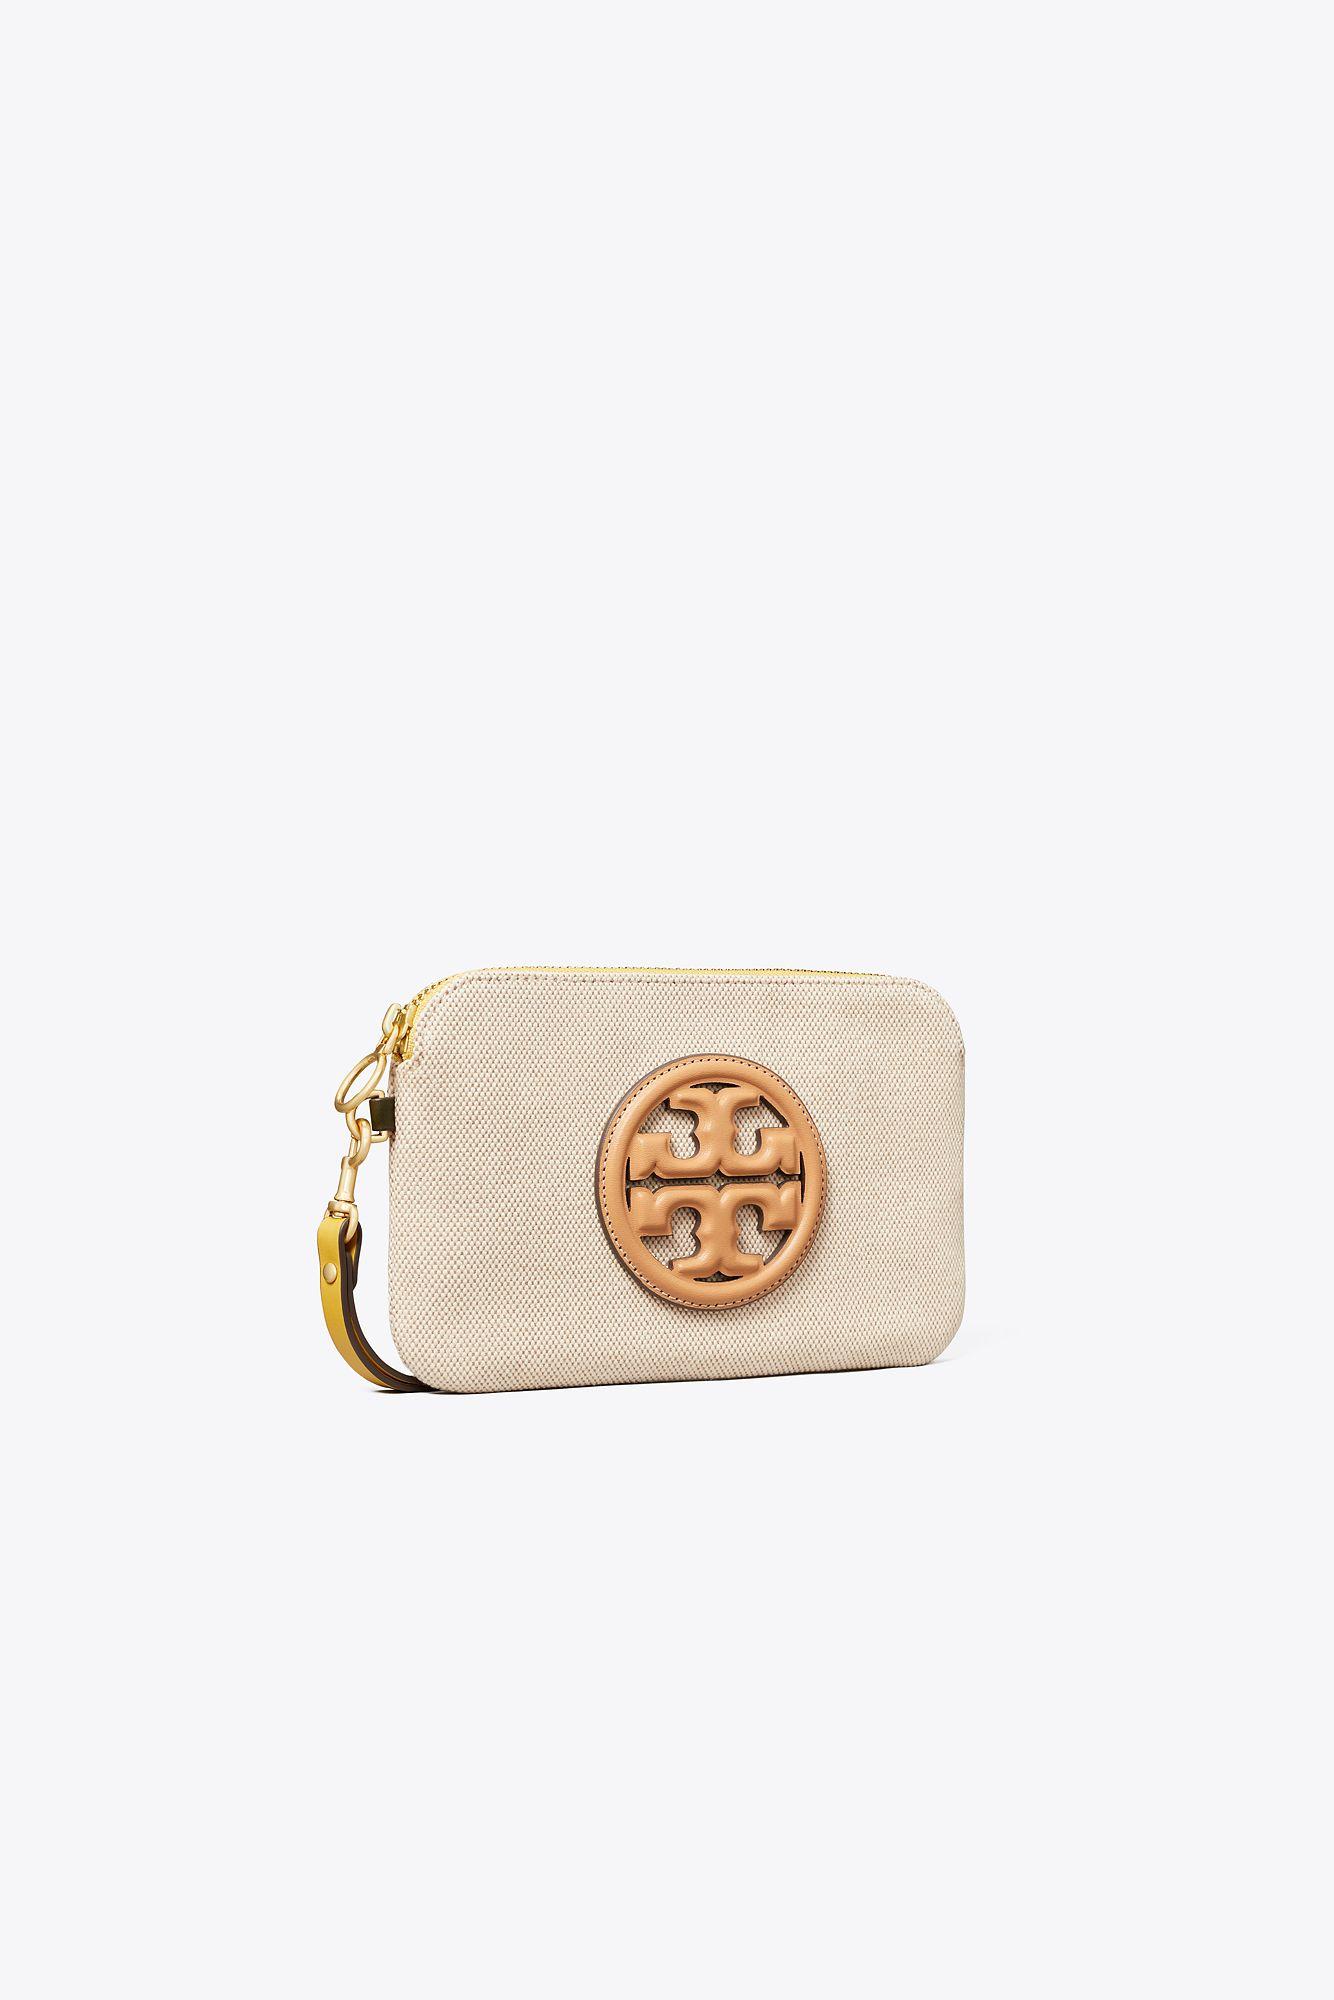 Tory Burch Perry Bombé Canvas Wristlet in Natural (White) | Lyst